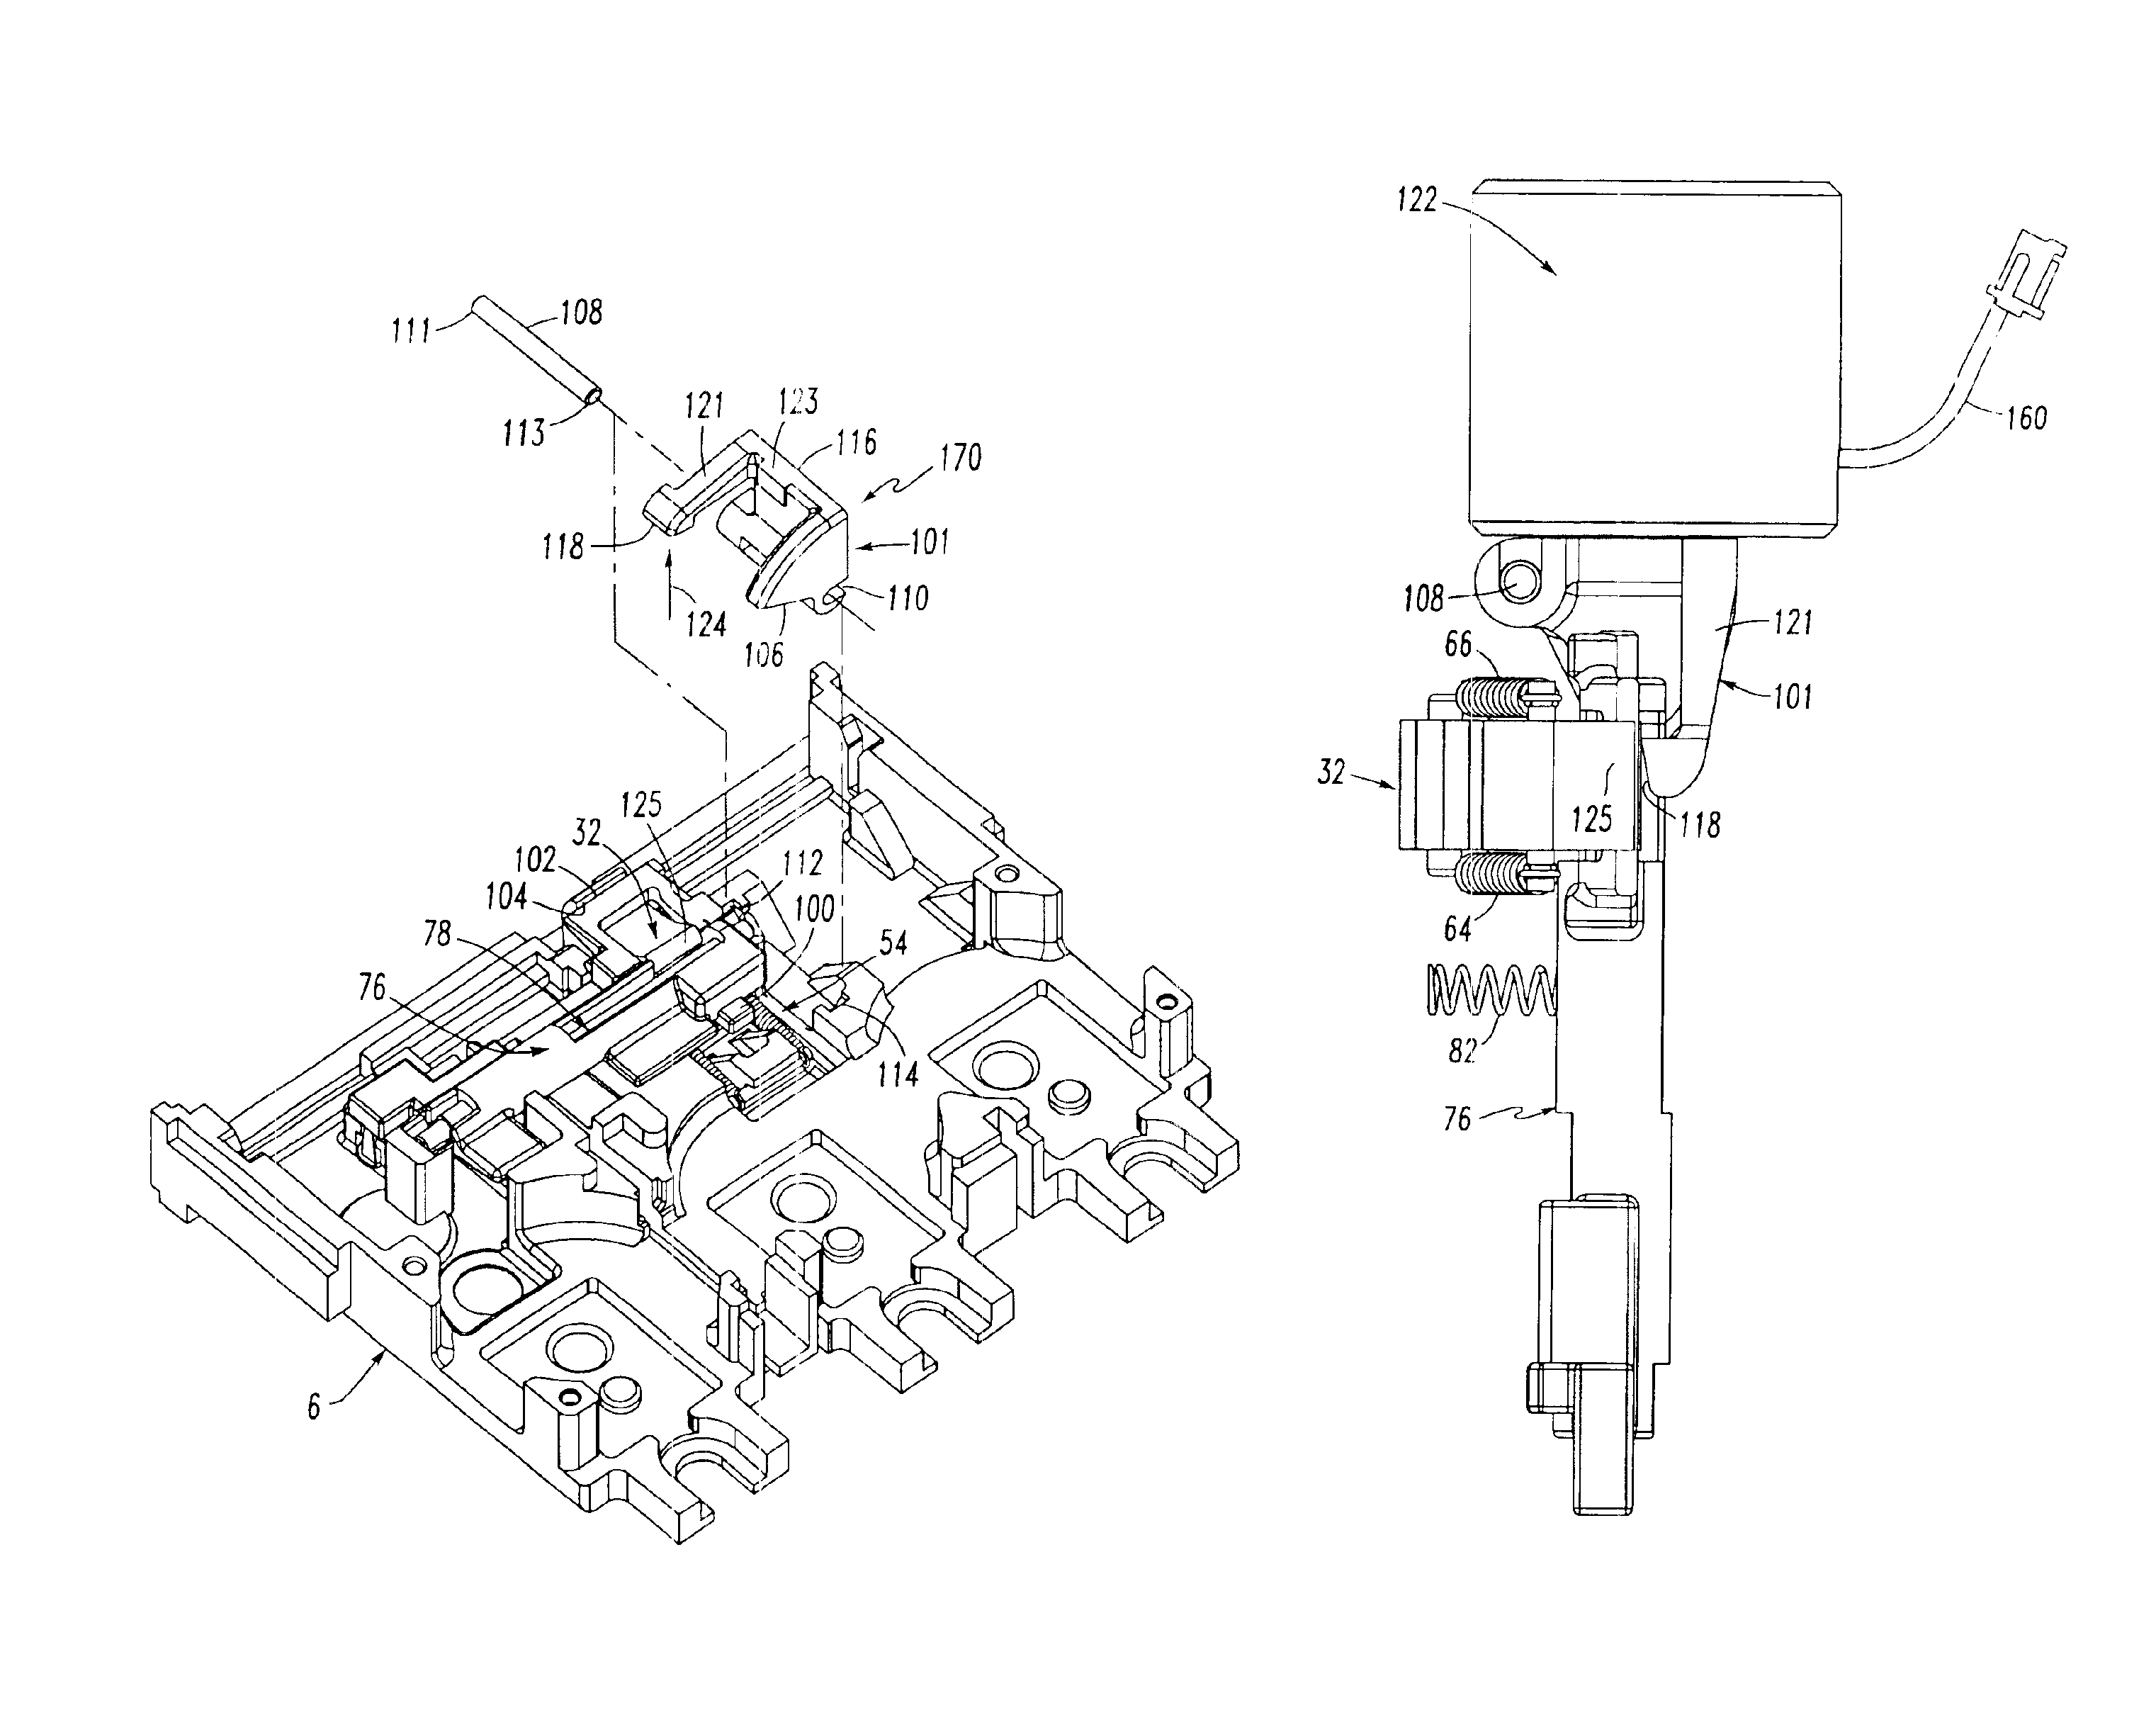 Circuit breaker trip unit including a plunger resetting a trip actuator mechanism and a trip bar